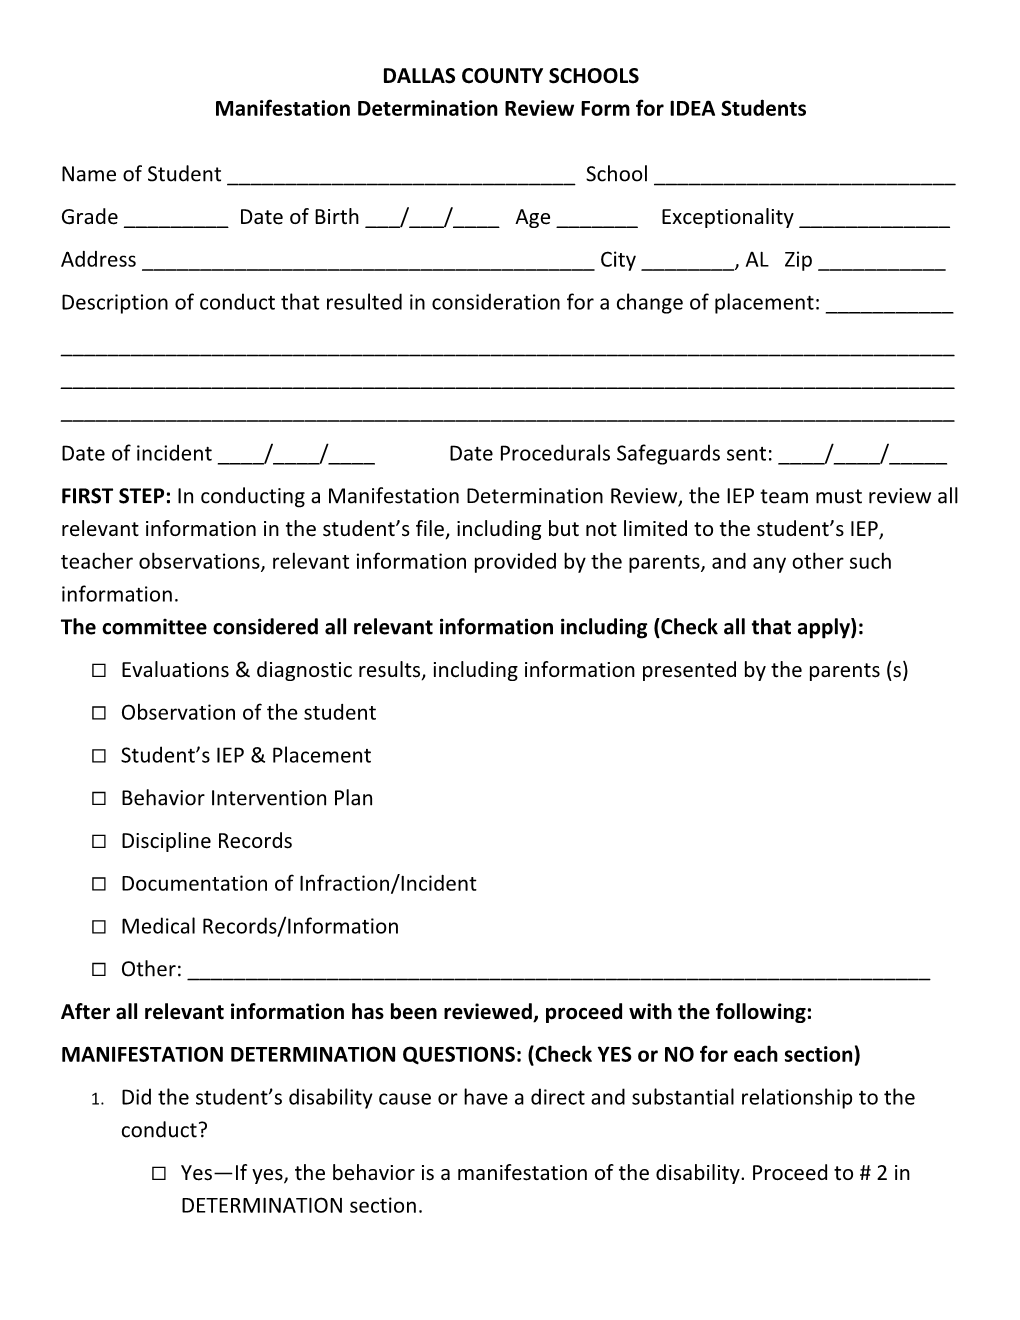 Manifestation Determination Review Form for IDEA Students